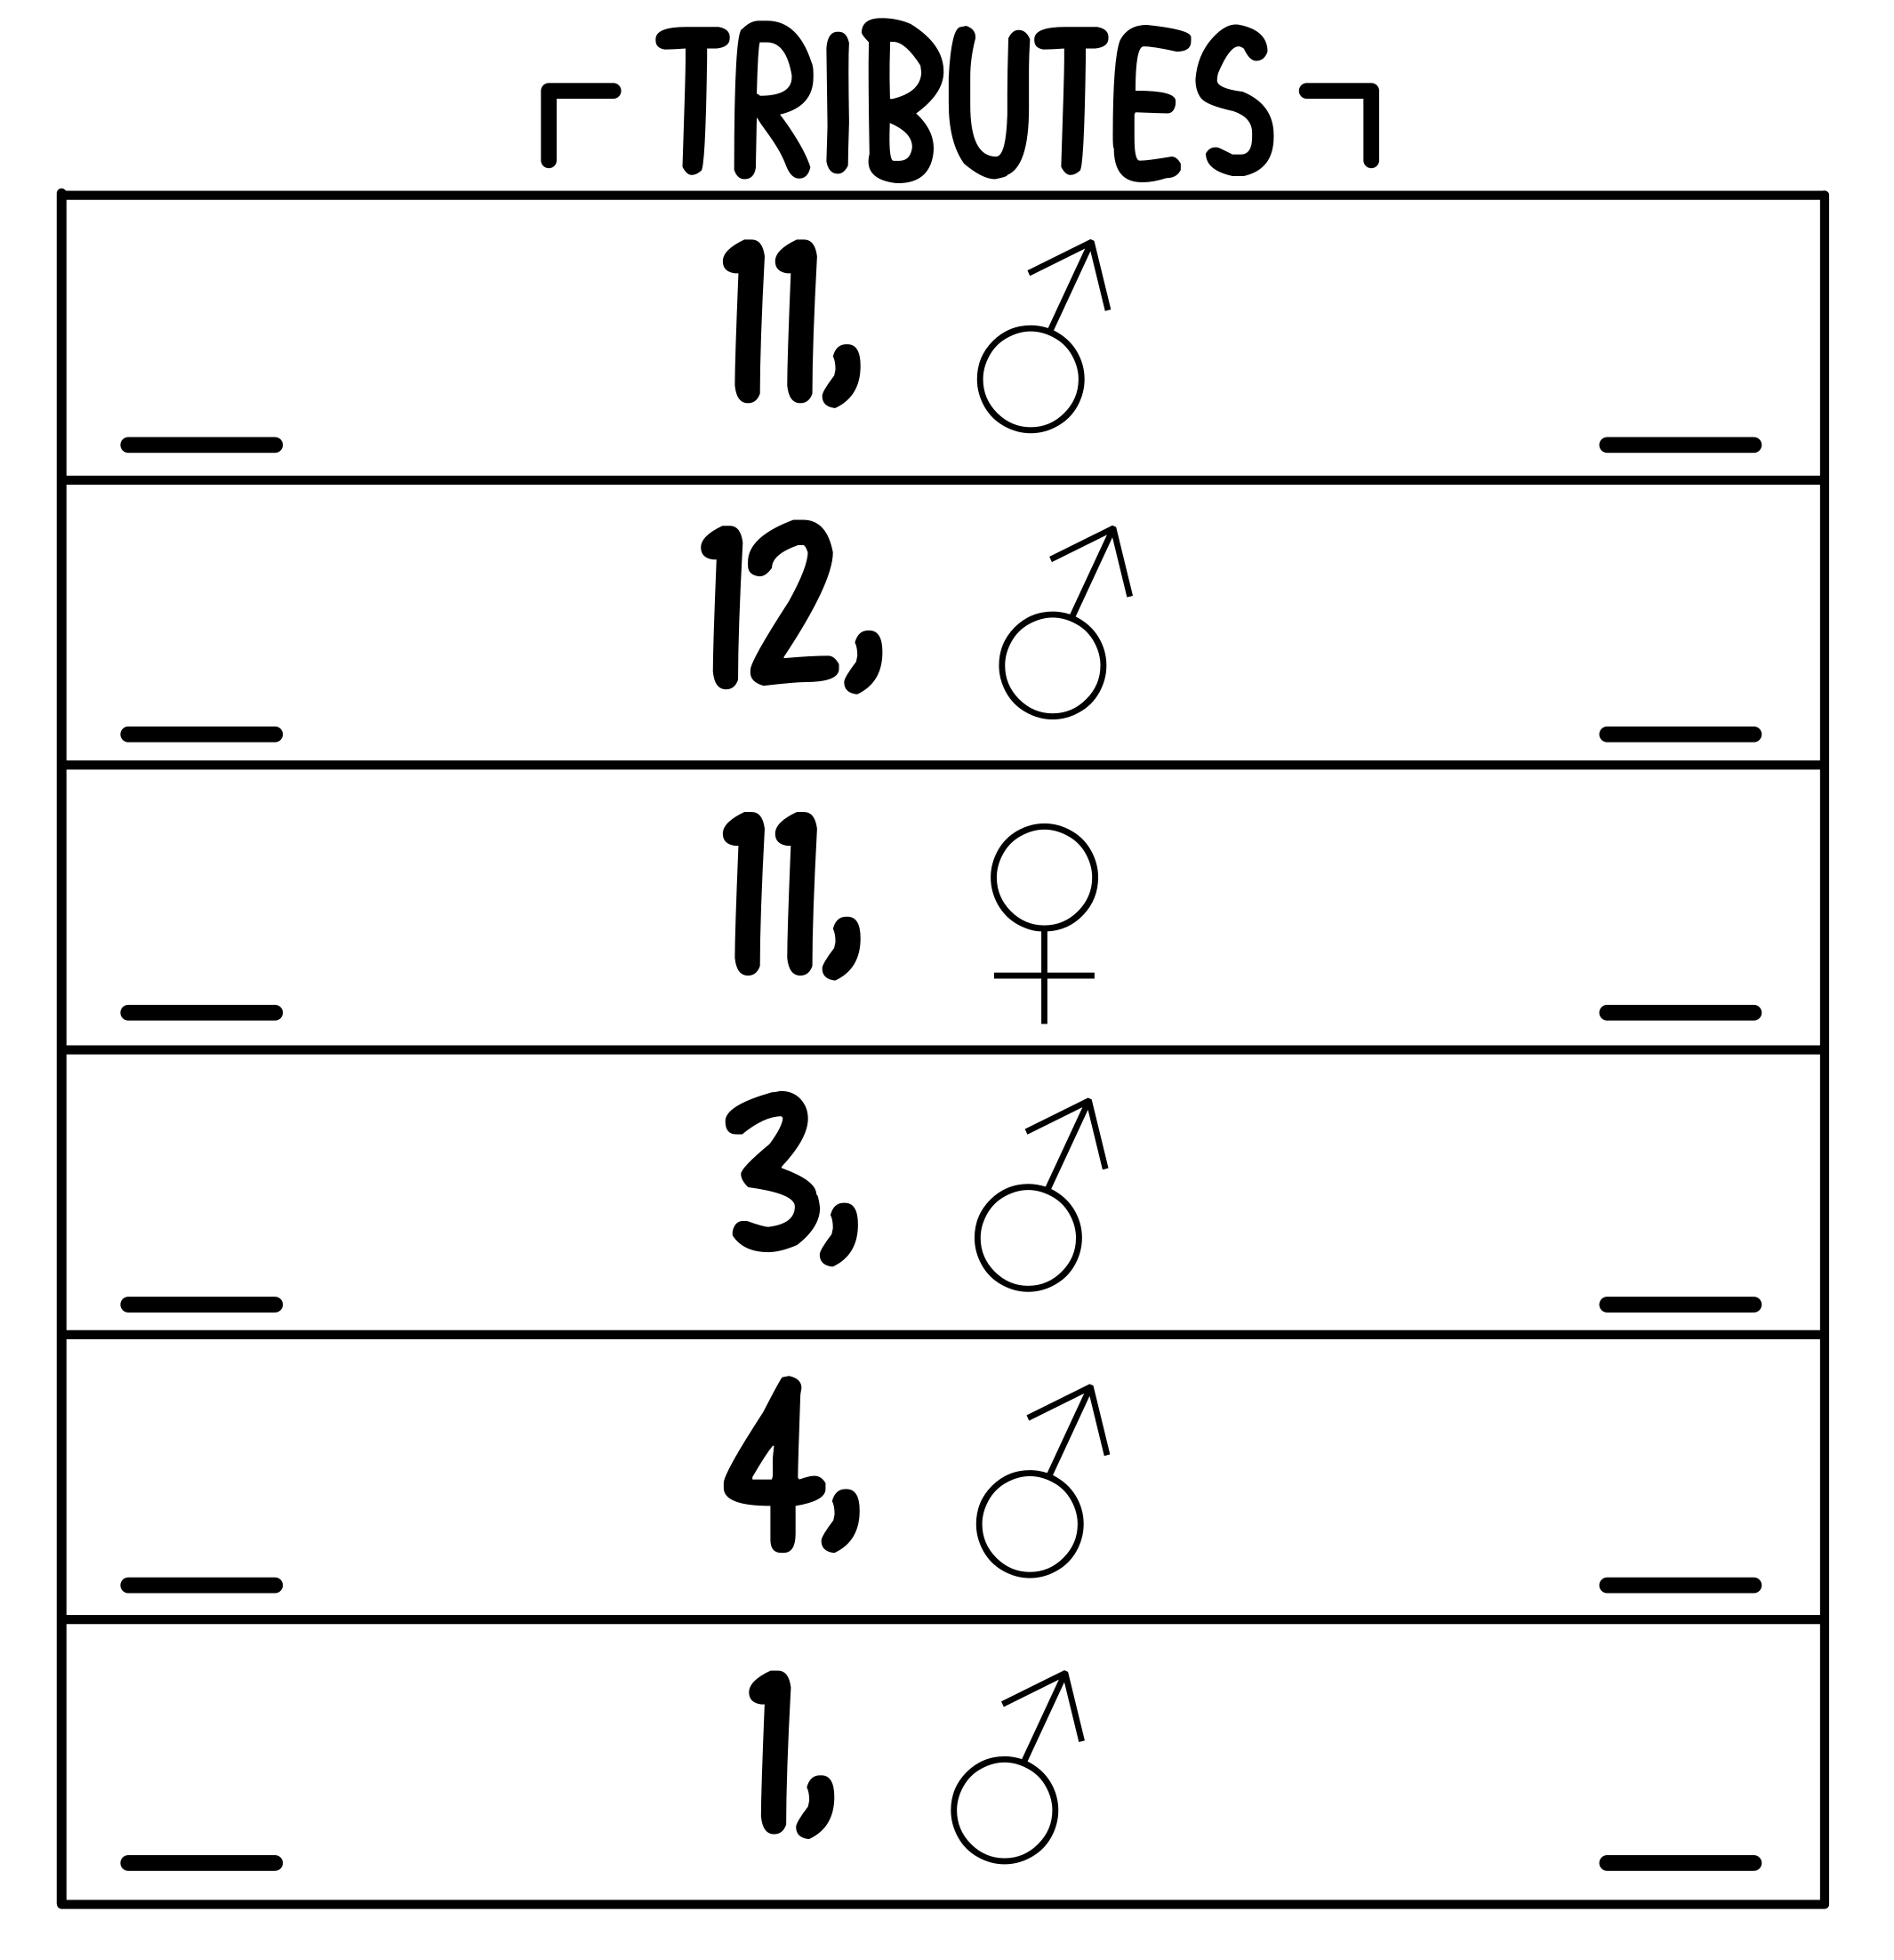 A grid labeled 'Tributes' with 5 rows. Please see the Google Sheets
copy for the text-based version.